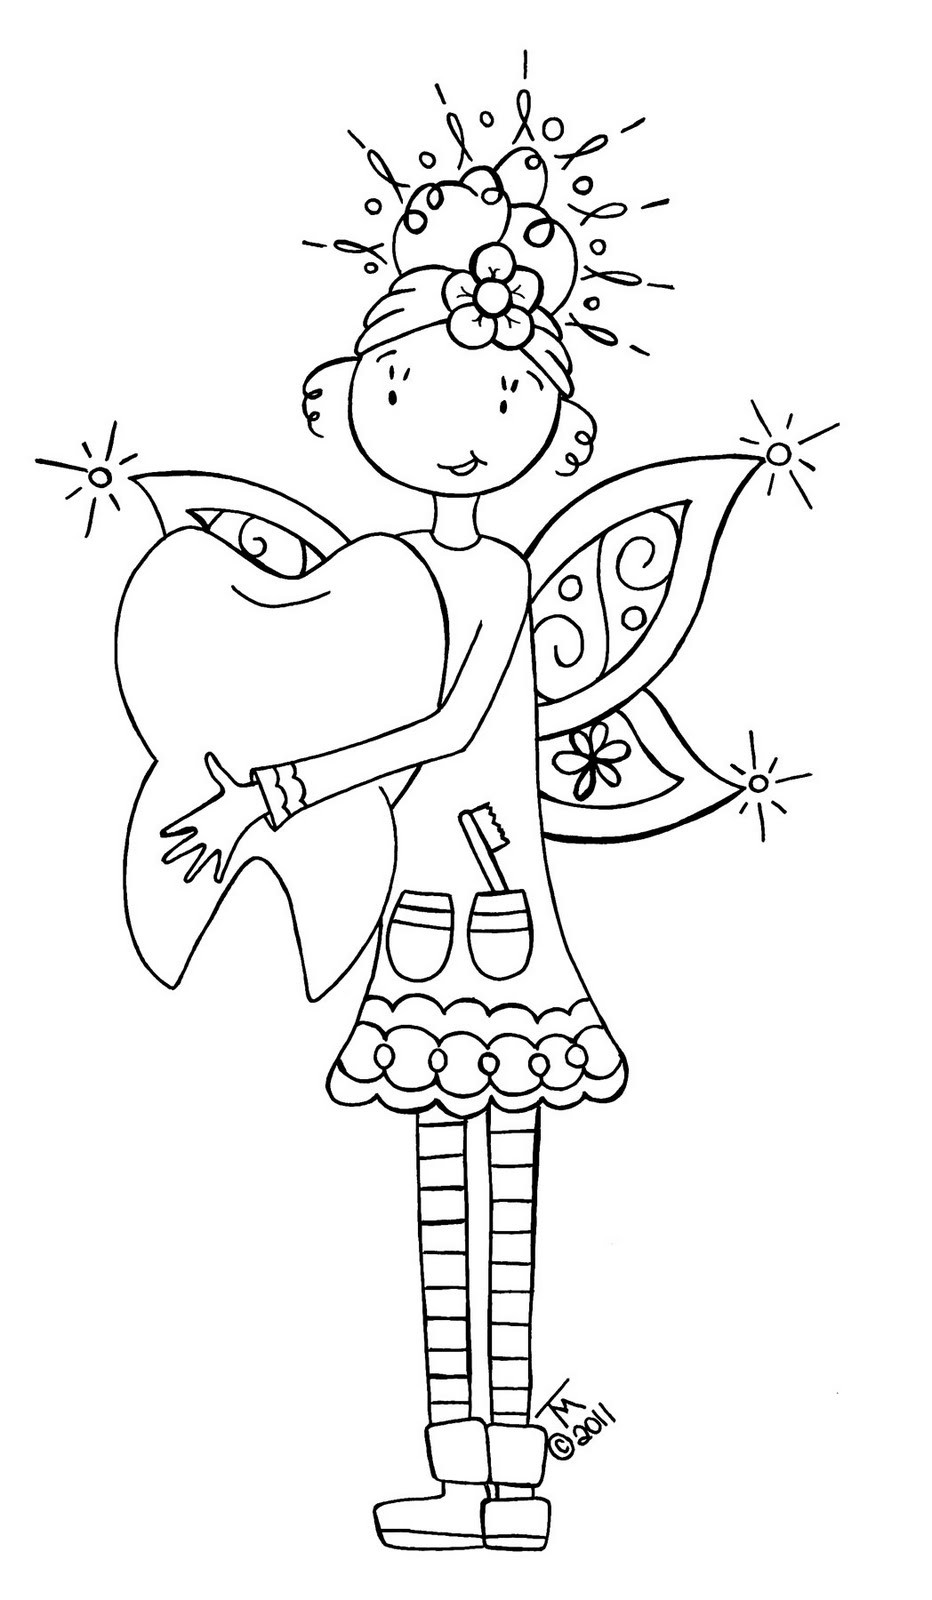 Dental Coloring Pages Printable
 The Stamping Boutique 4 24 11 5 1 11